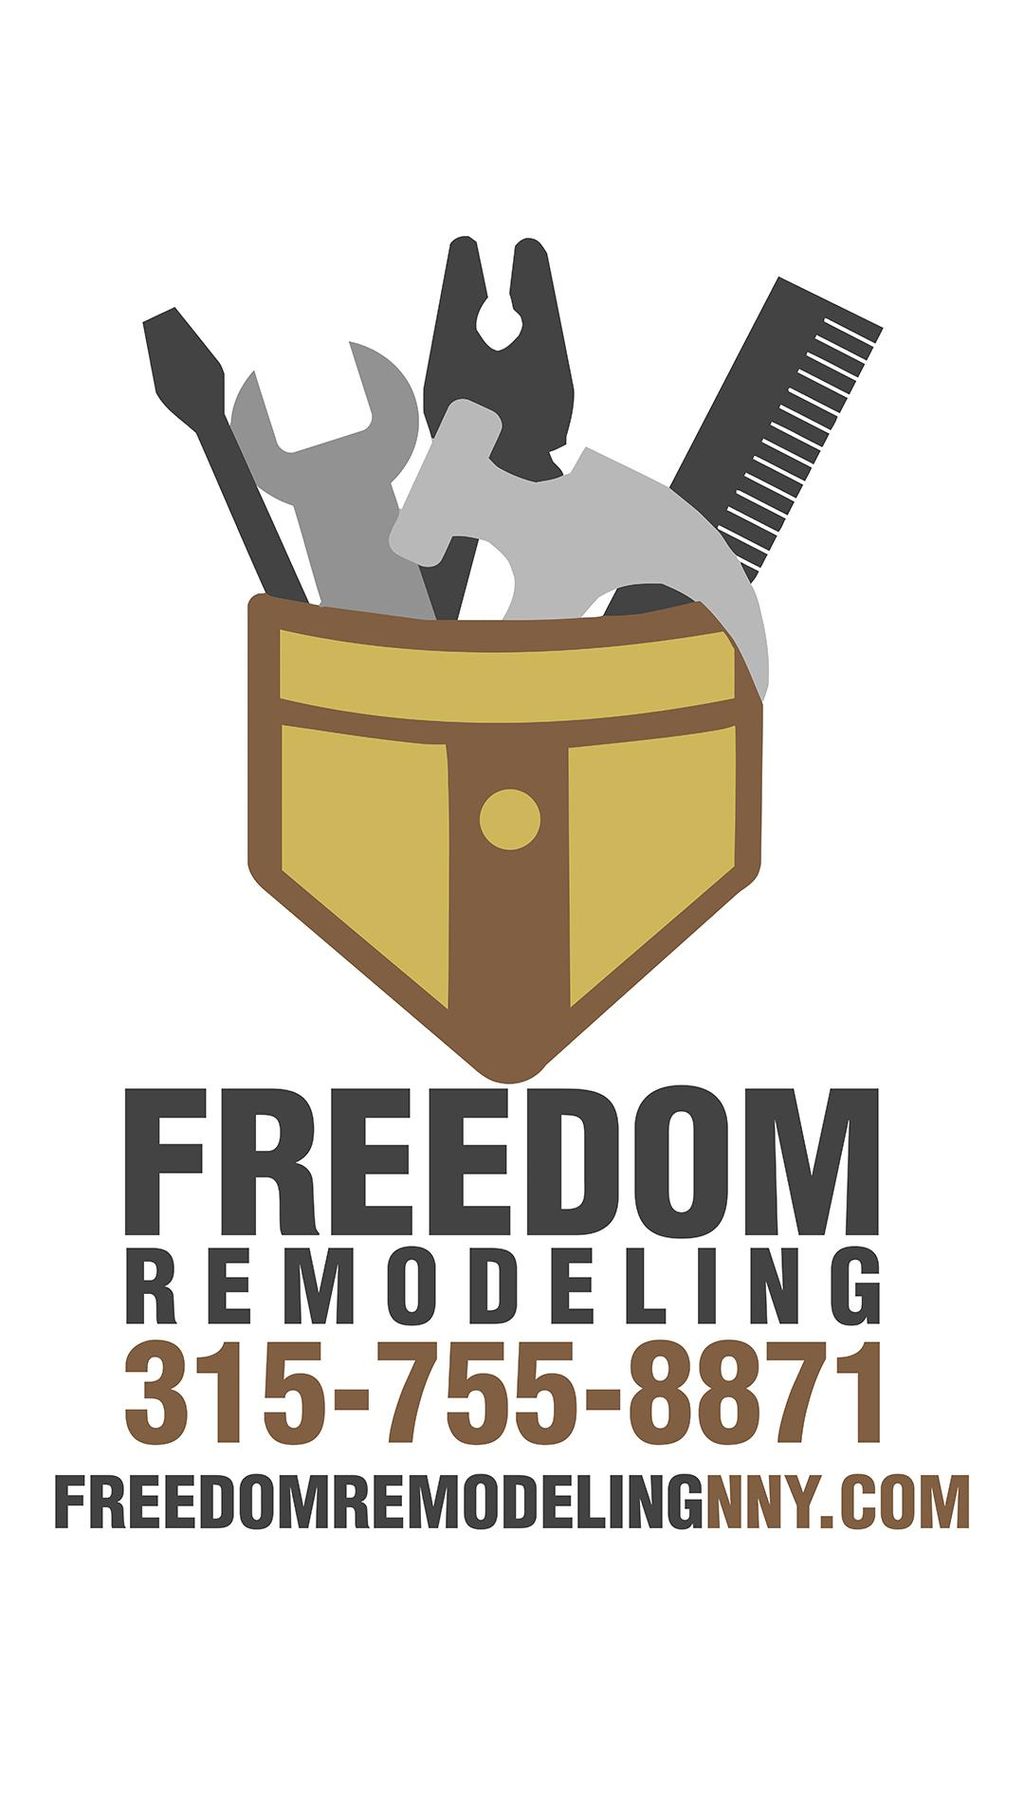 Freedom Remodeling